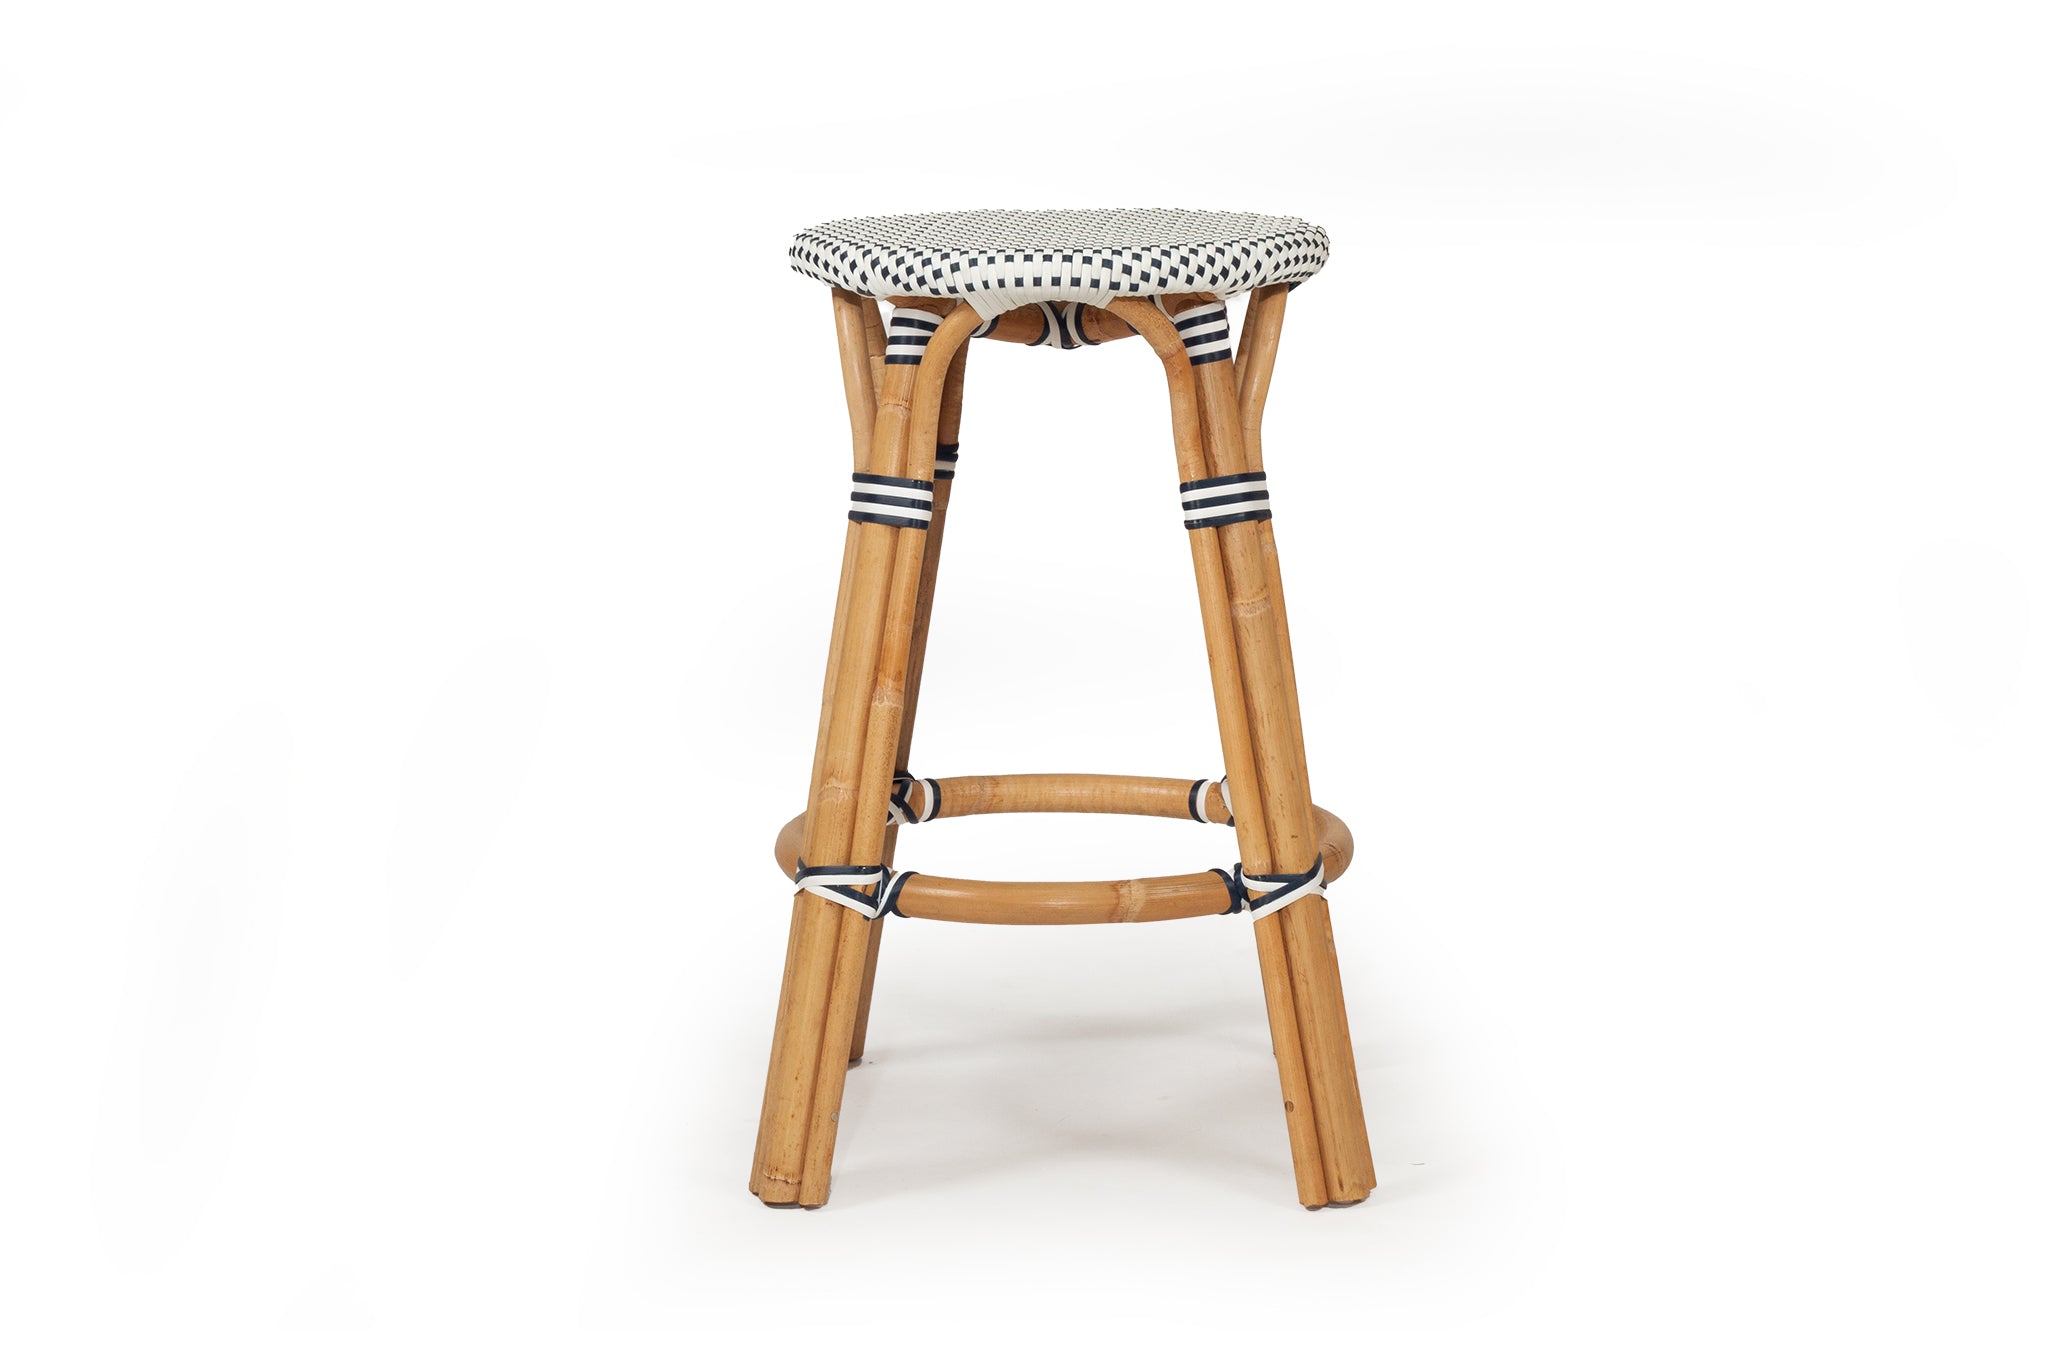 Williamstown Rattan Backless Counter Stool – Navy